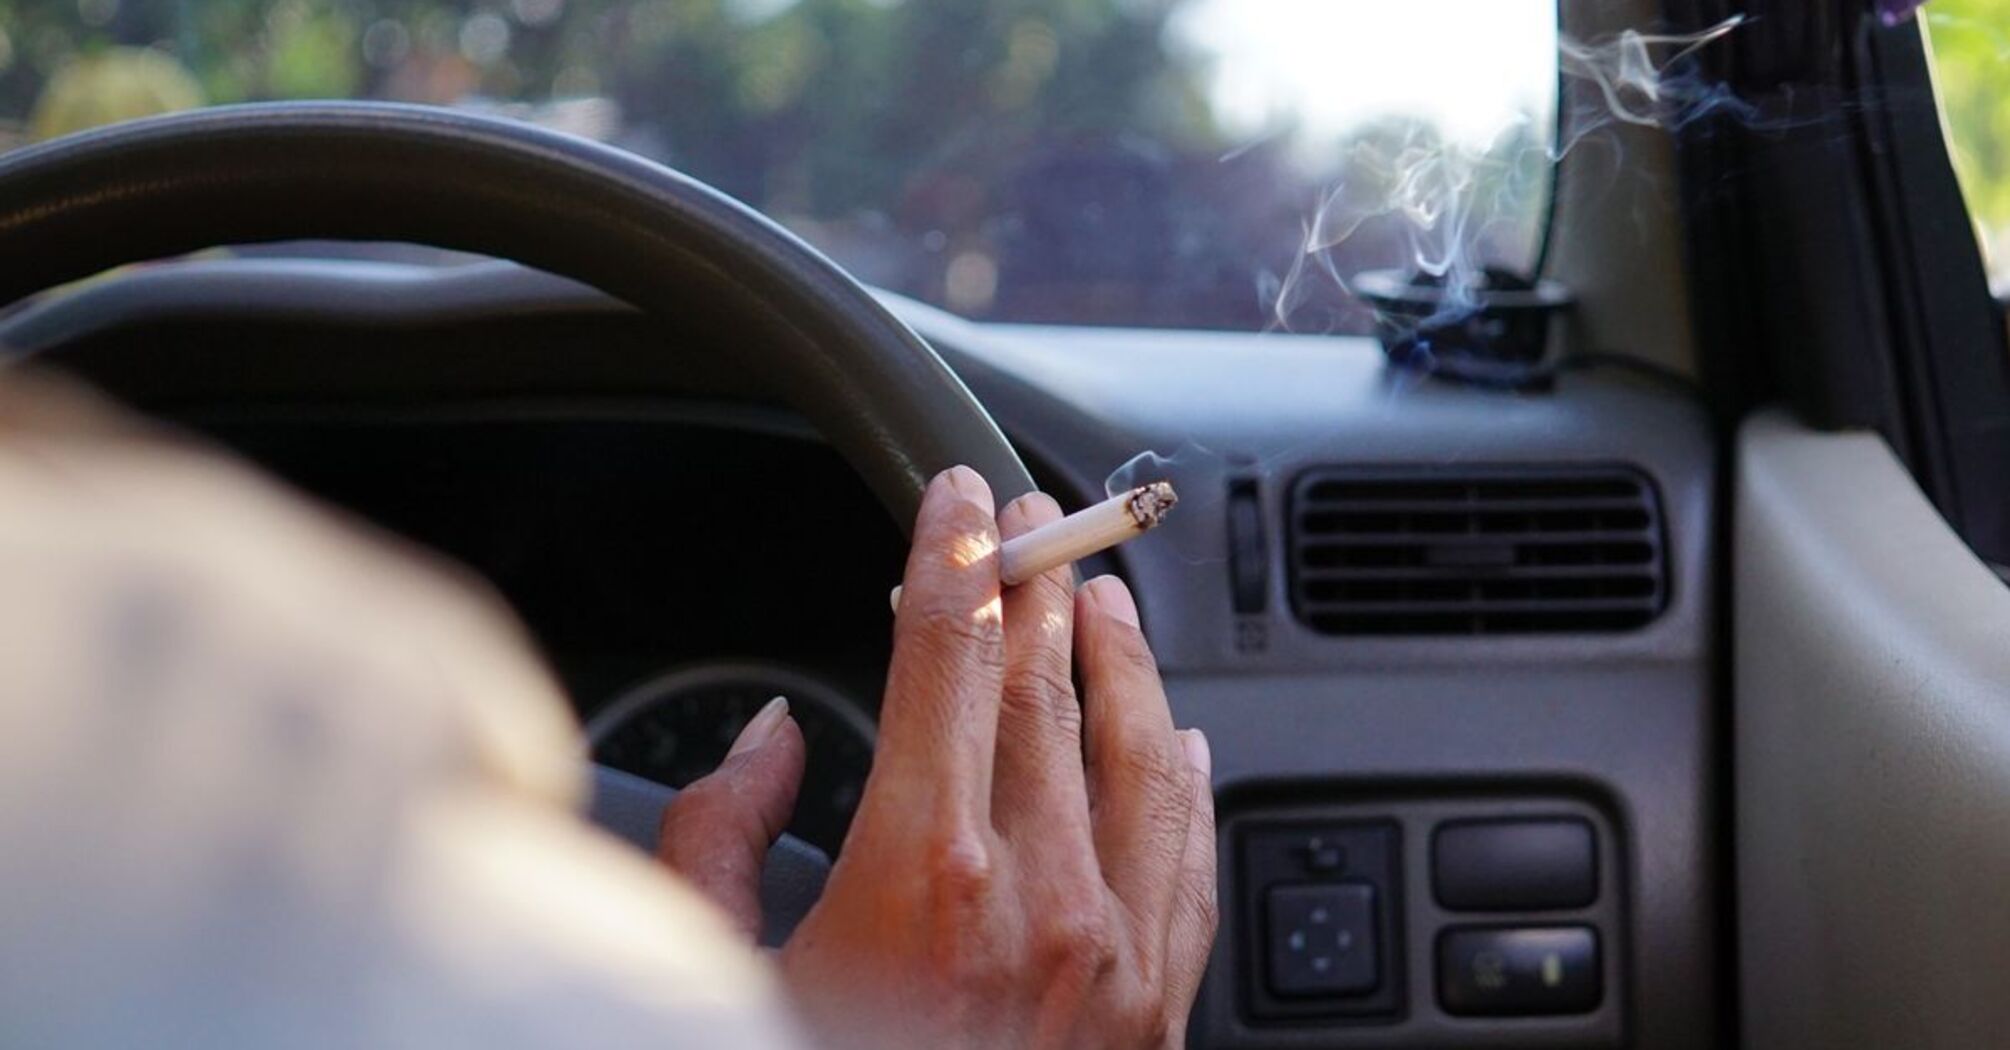 How to get rid of cigarette smell in the car